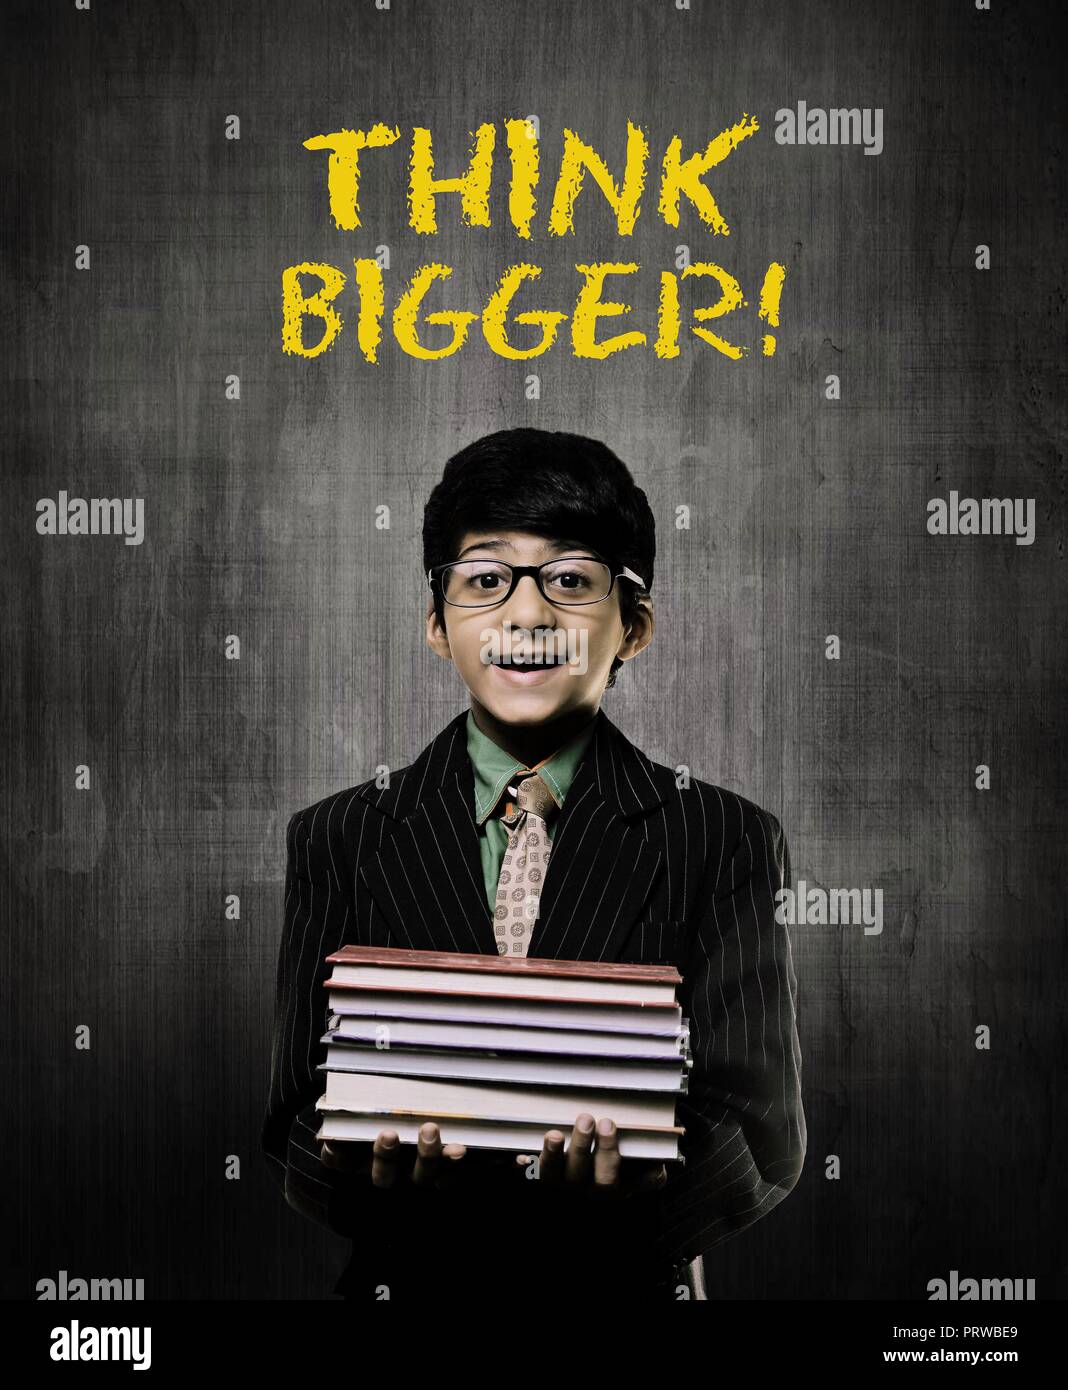 Cute Intelligent Little Boy Holding Books And Wearing Glasses, Smiling While Standing Before A Chalkboard, Think Big Is Written On Board In Yellow Col Stock Photo